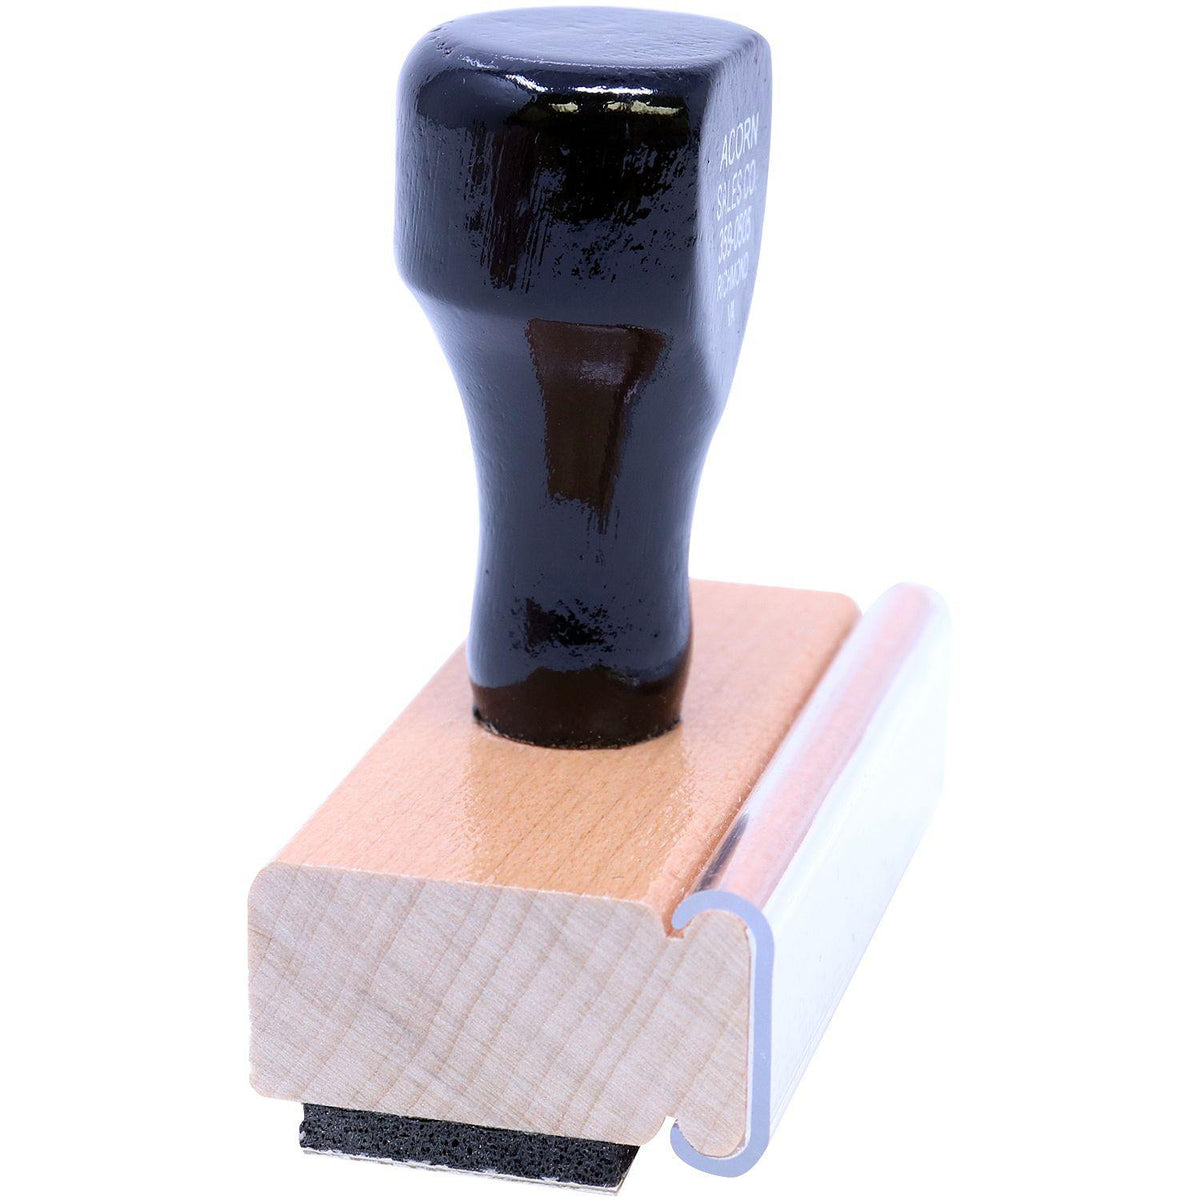 Lets Review This Rubber Stamp - Engineer Seal Stamps - Brand_Acorn, Impression Size_Small, Stamp Type_Regular Stamp, Type of Use_Teacher